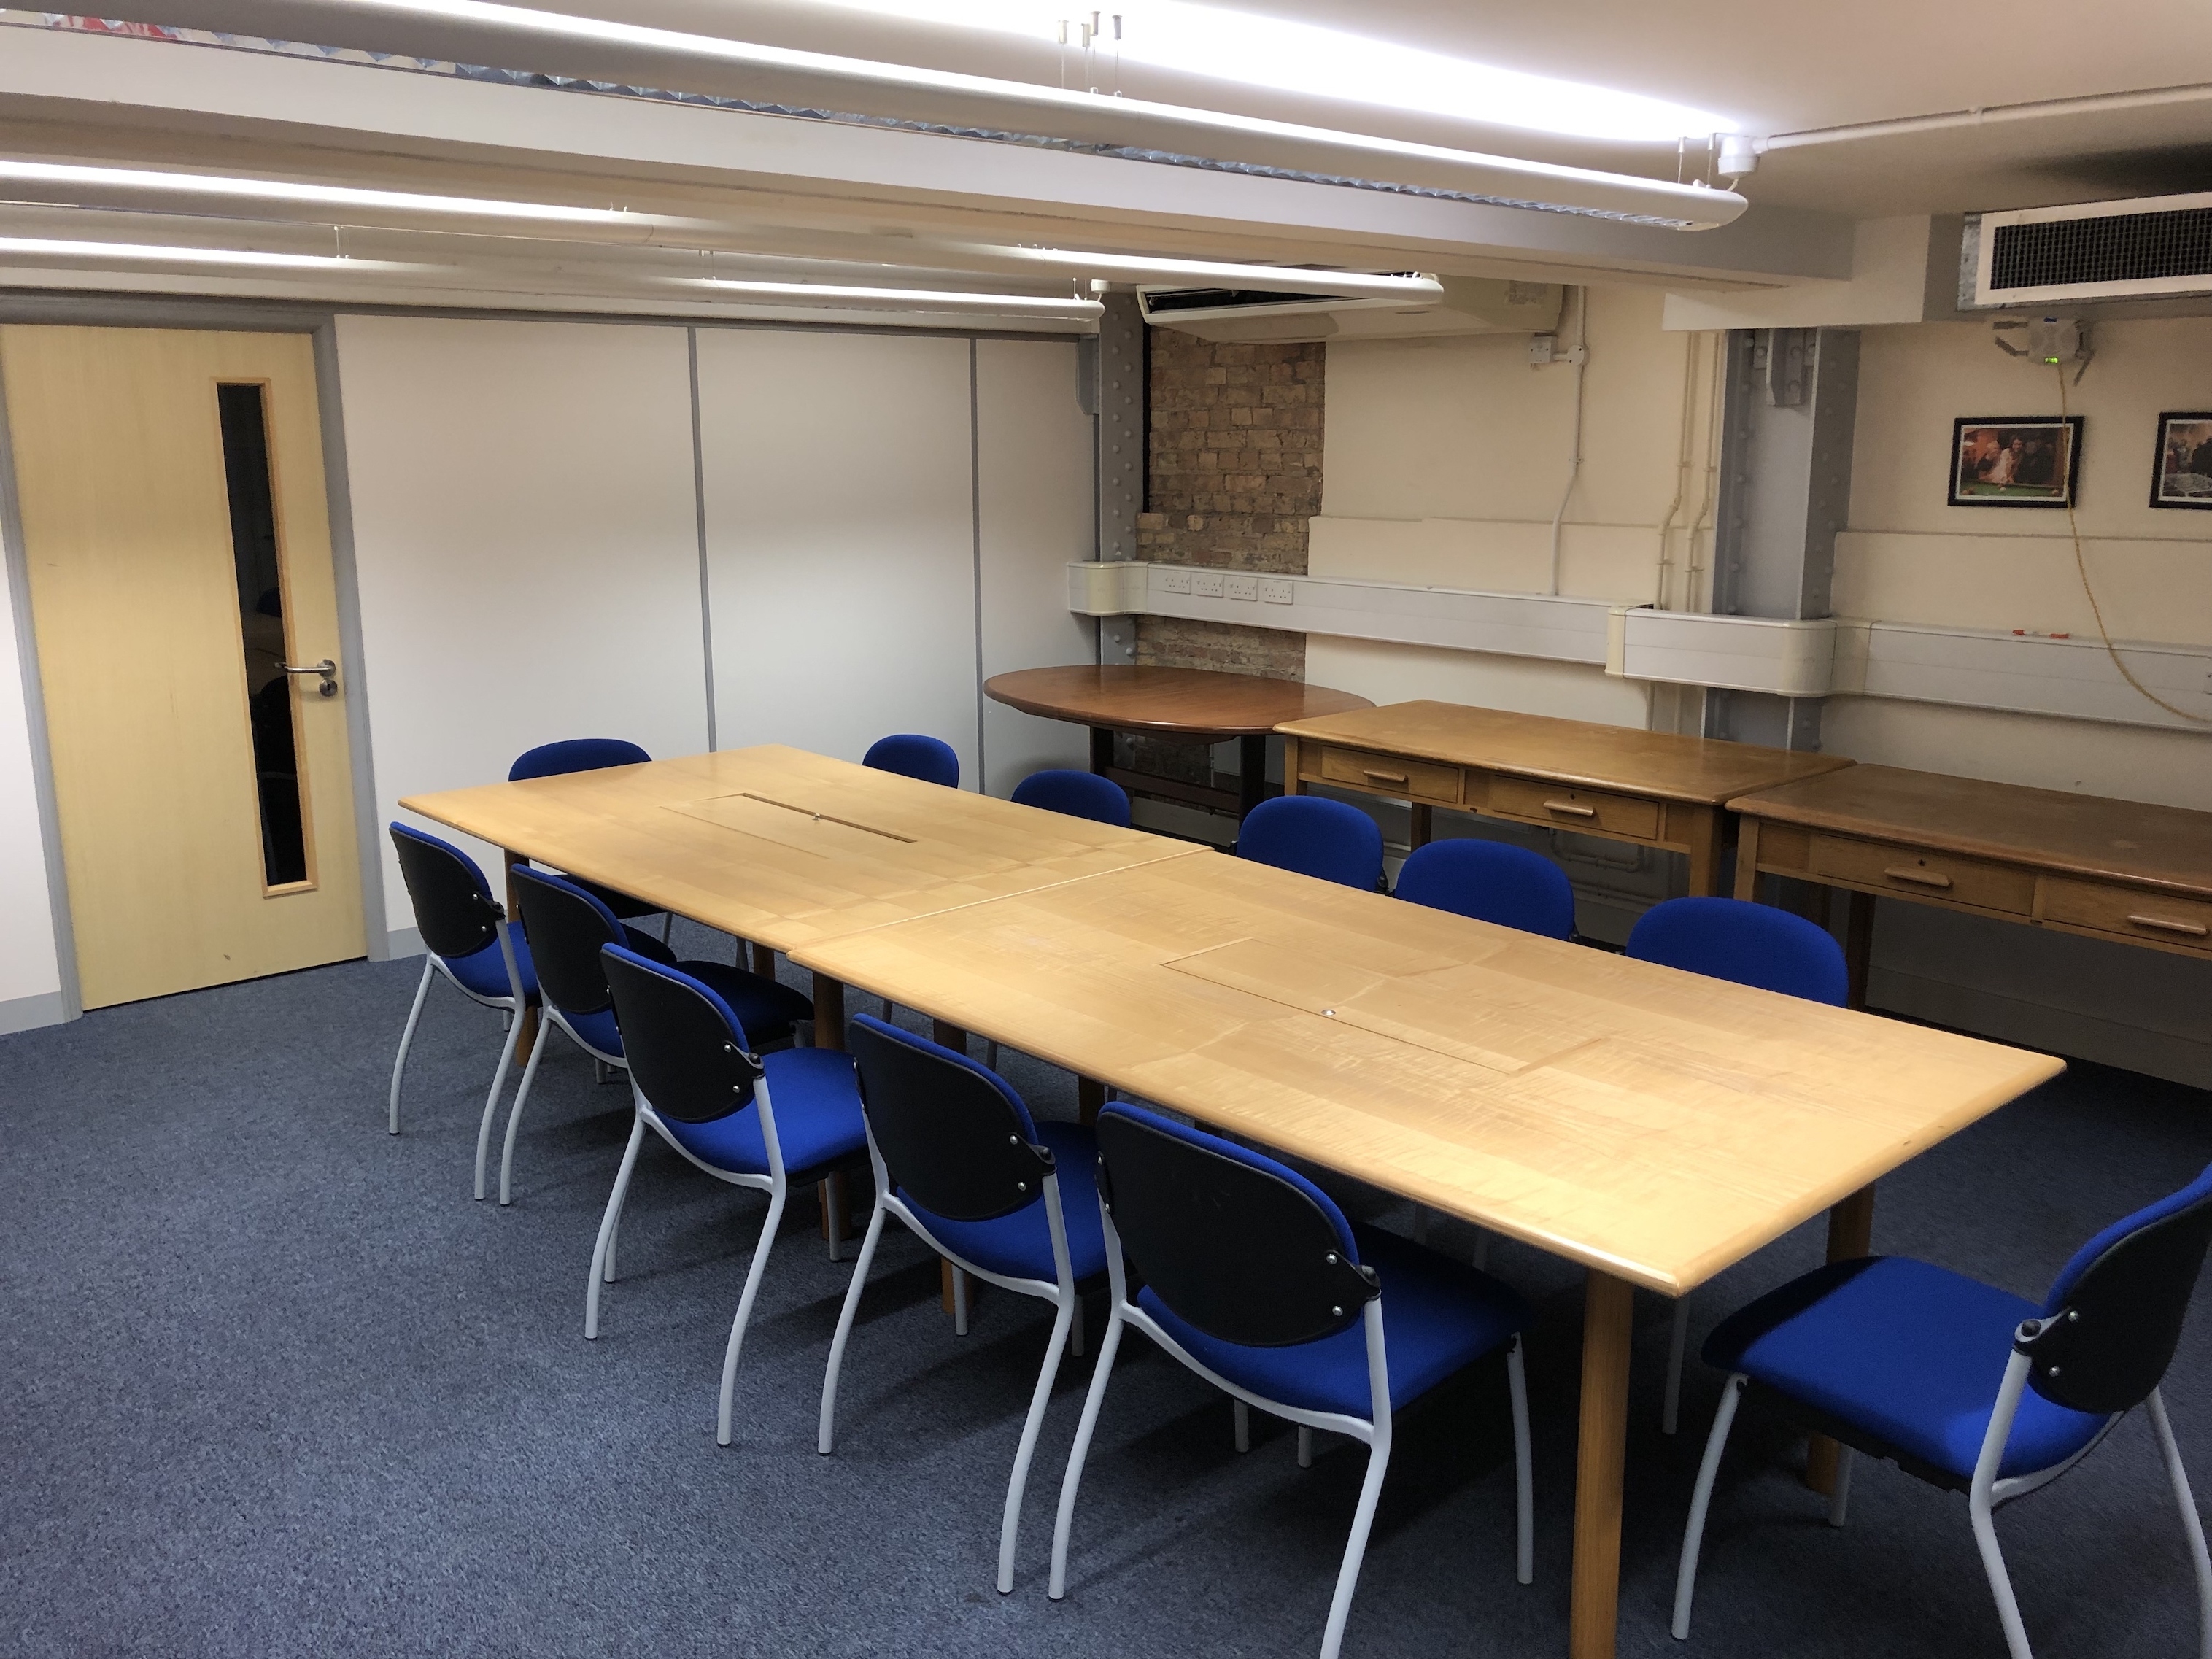 Photograph showing the standard layout of the Mill Lane Committee Room - a room with twelve chairs around a large boardroom table.